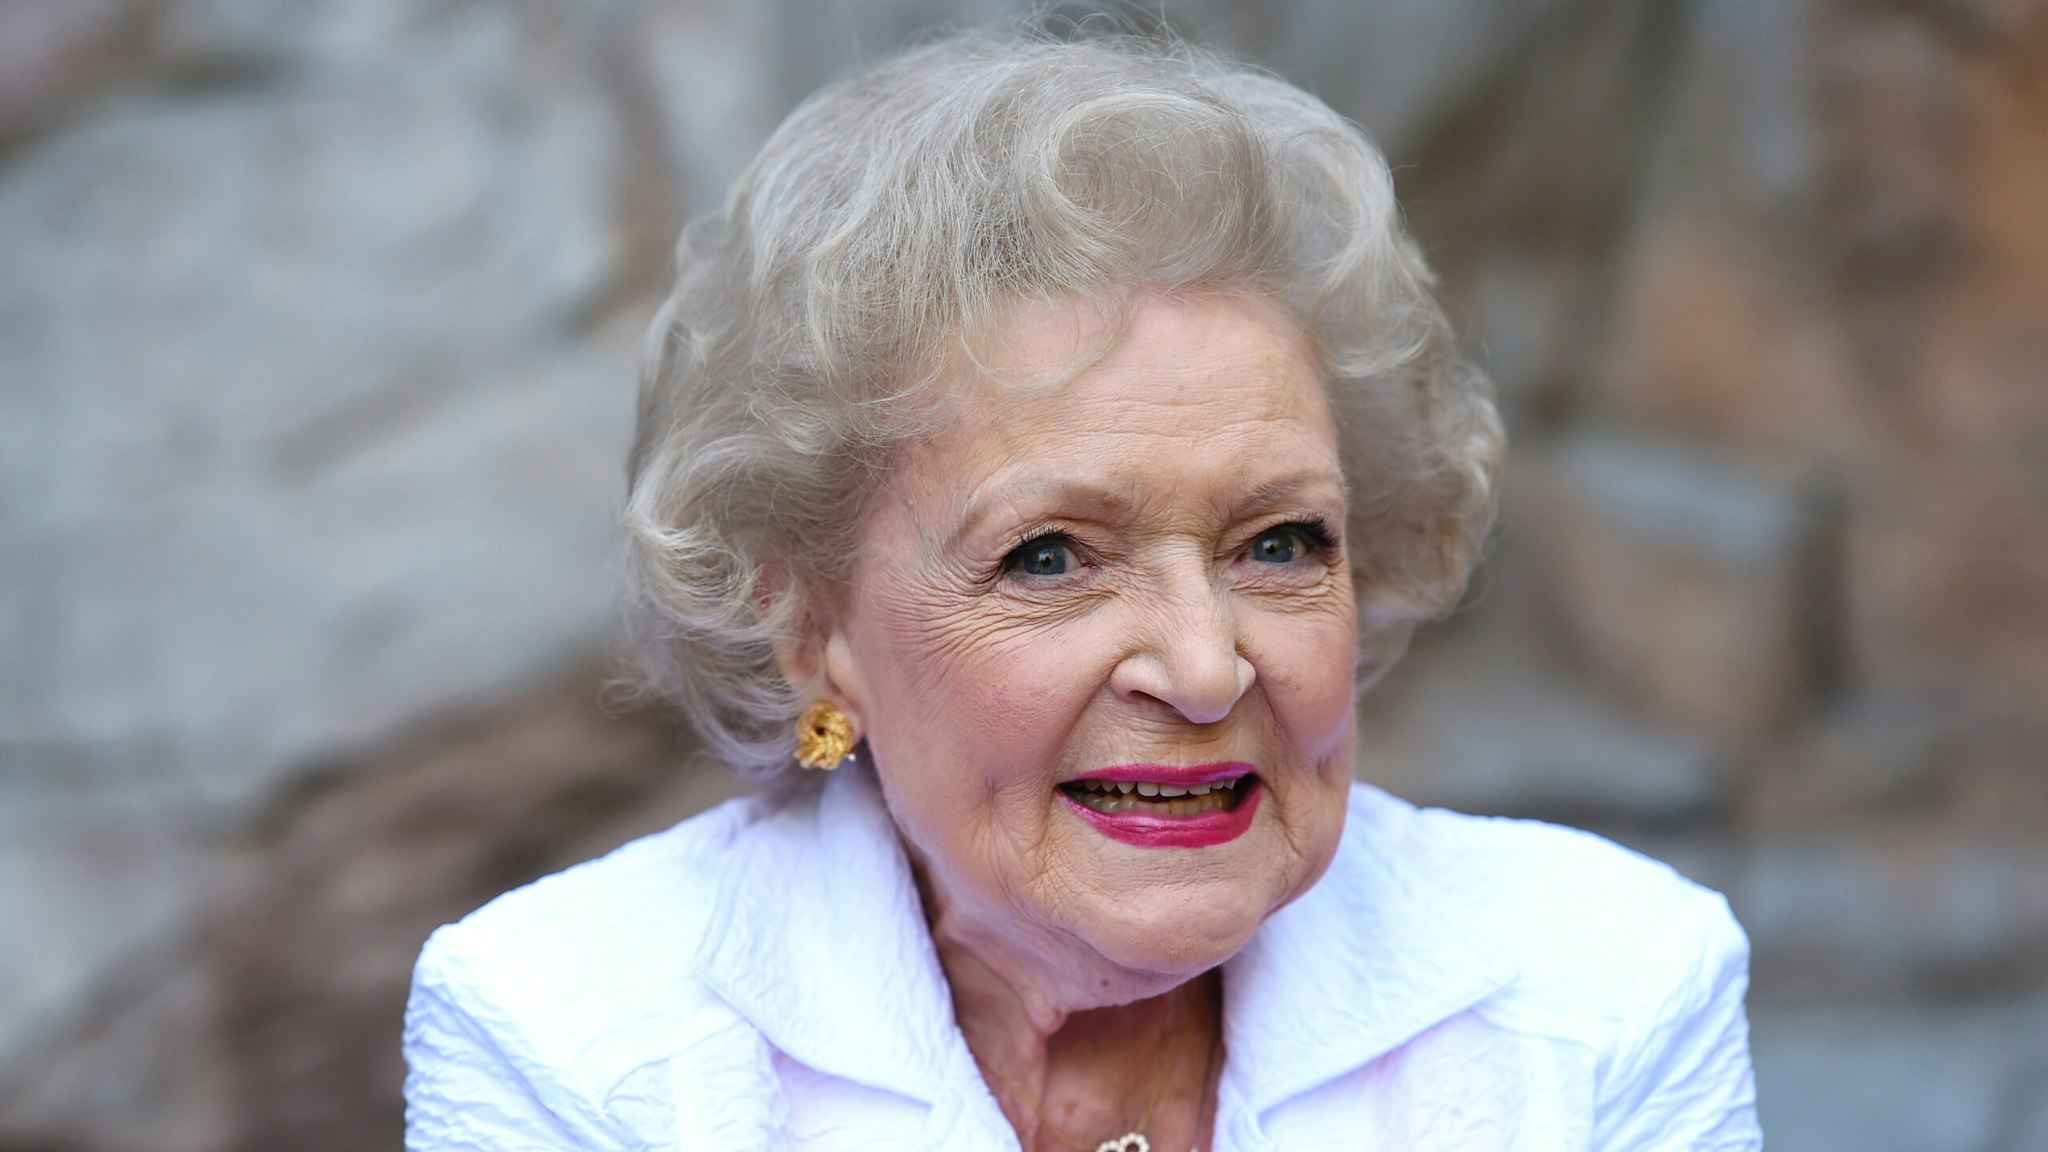 LOS ANGELES, CA - JUNE 20: Actress Betty White attends The Greater Los Angeles Zoo Association's (GLAZA) 45th Annual Beastly Ball at the Los Angeles Zoo on June 20, 2015 in Los Angeles, California.